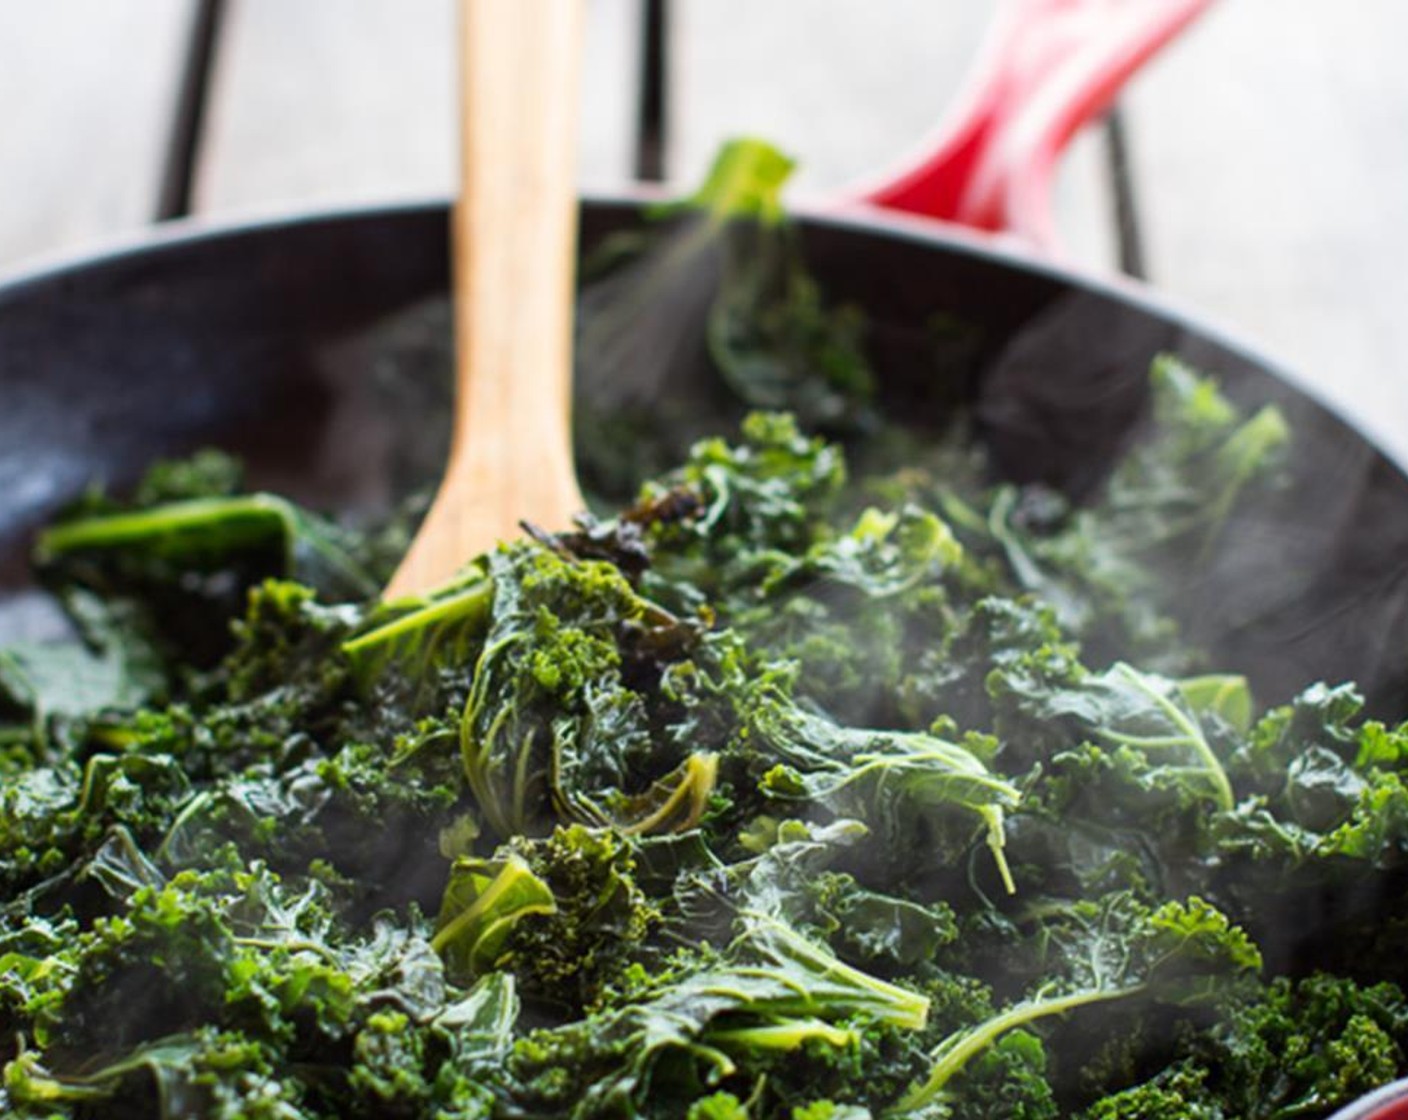 step 2 Heat a very large skillet (the largest you have!) over medium-high heat. Add all of the Kale (2 bunches) to the skillet and add 1 cup of water. Cover the skillet and cook for 10-15 minutes, stirring occasionally until the kale is wilted.